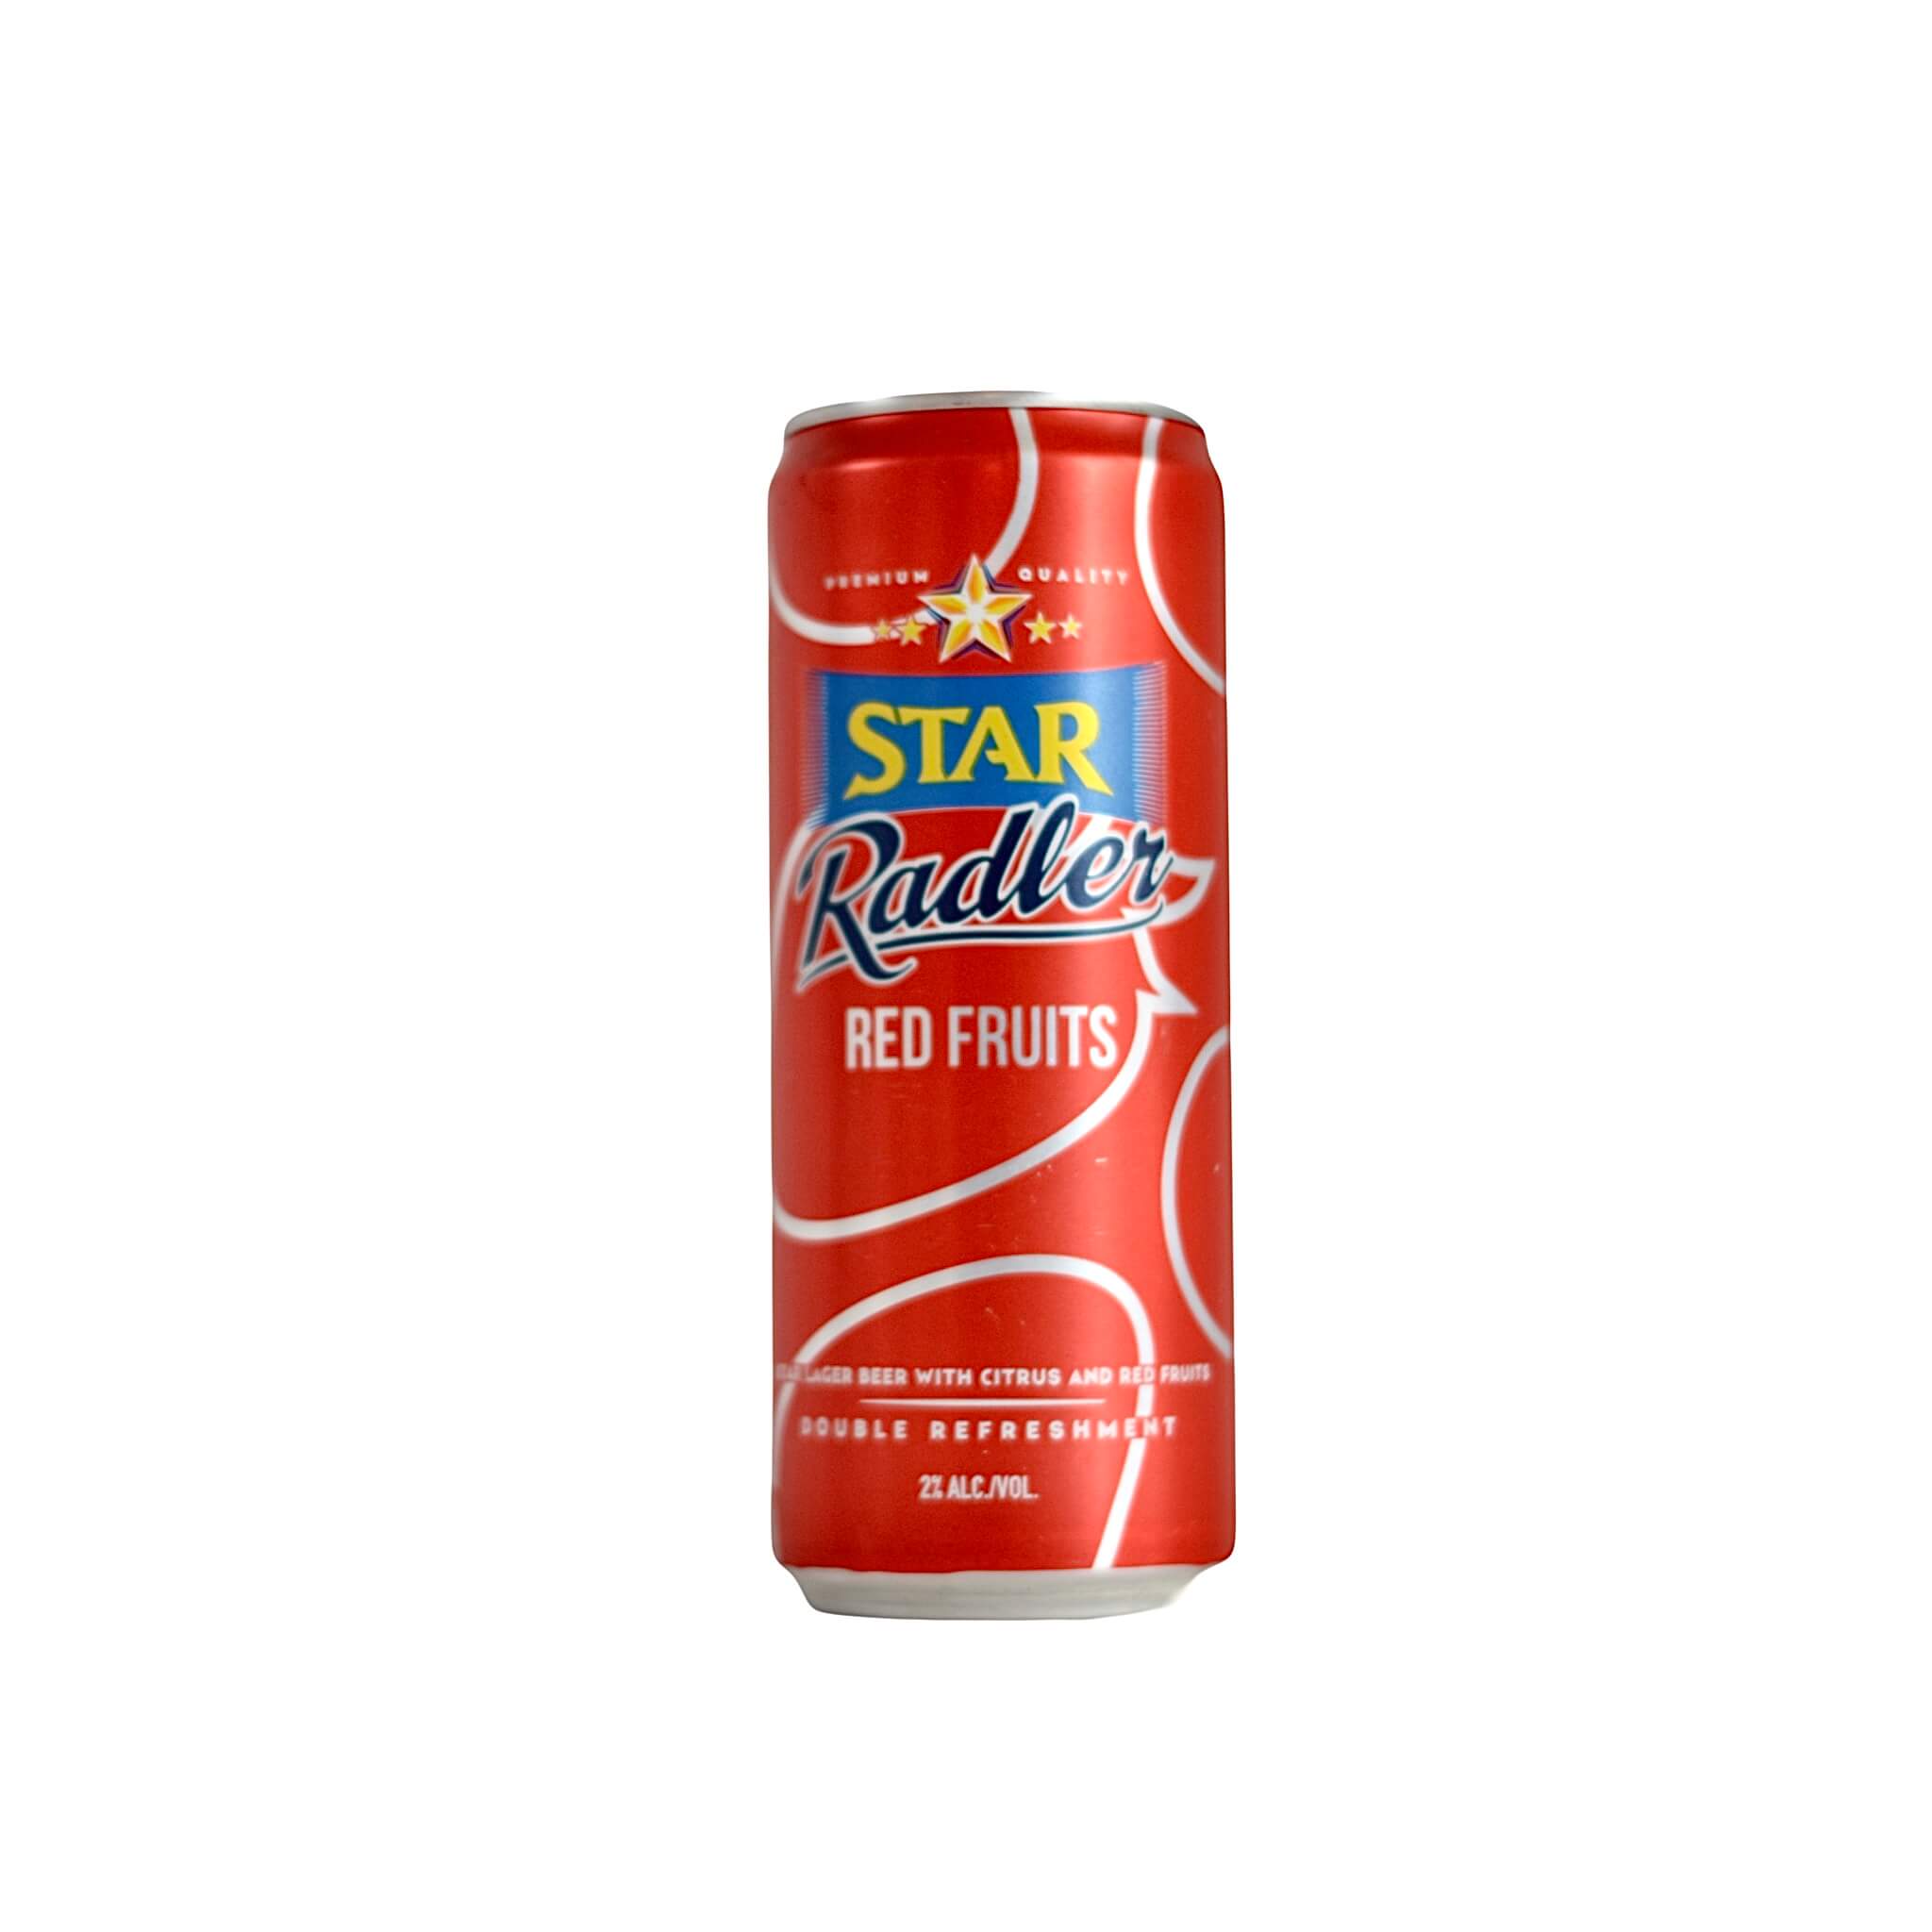 a can of Star Radlar red fruits